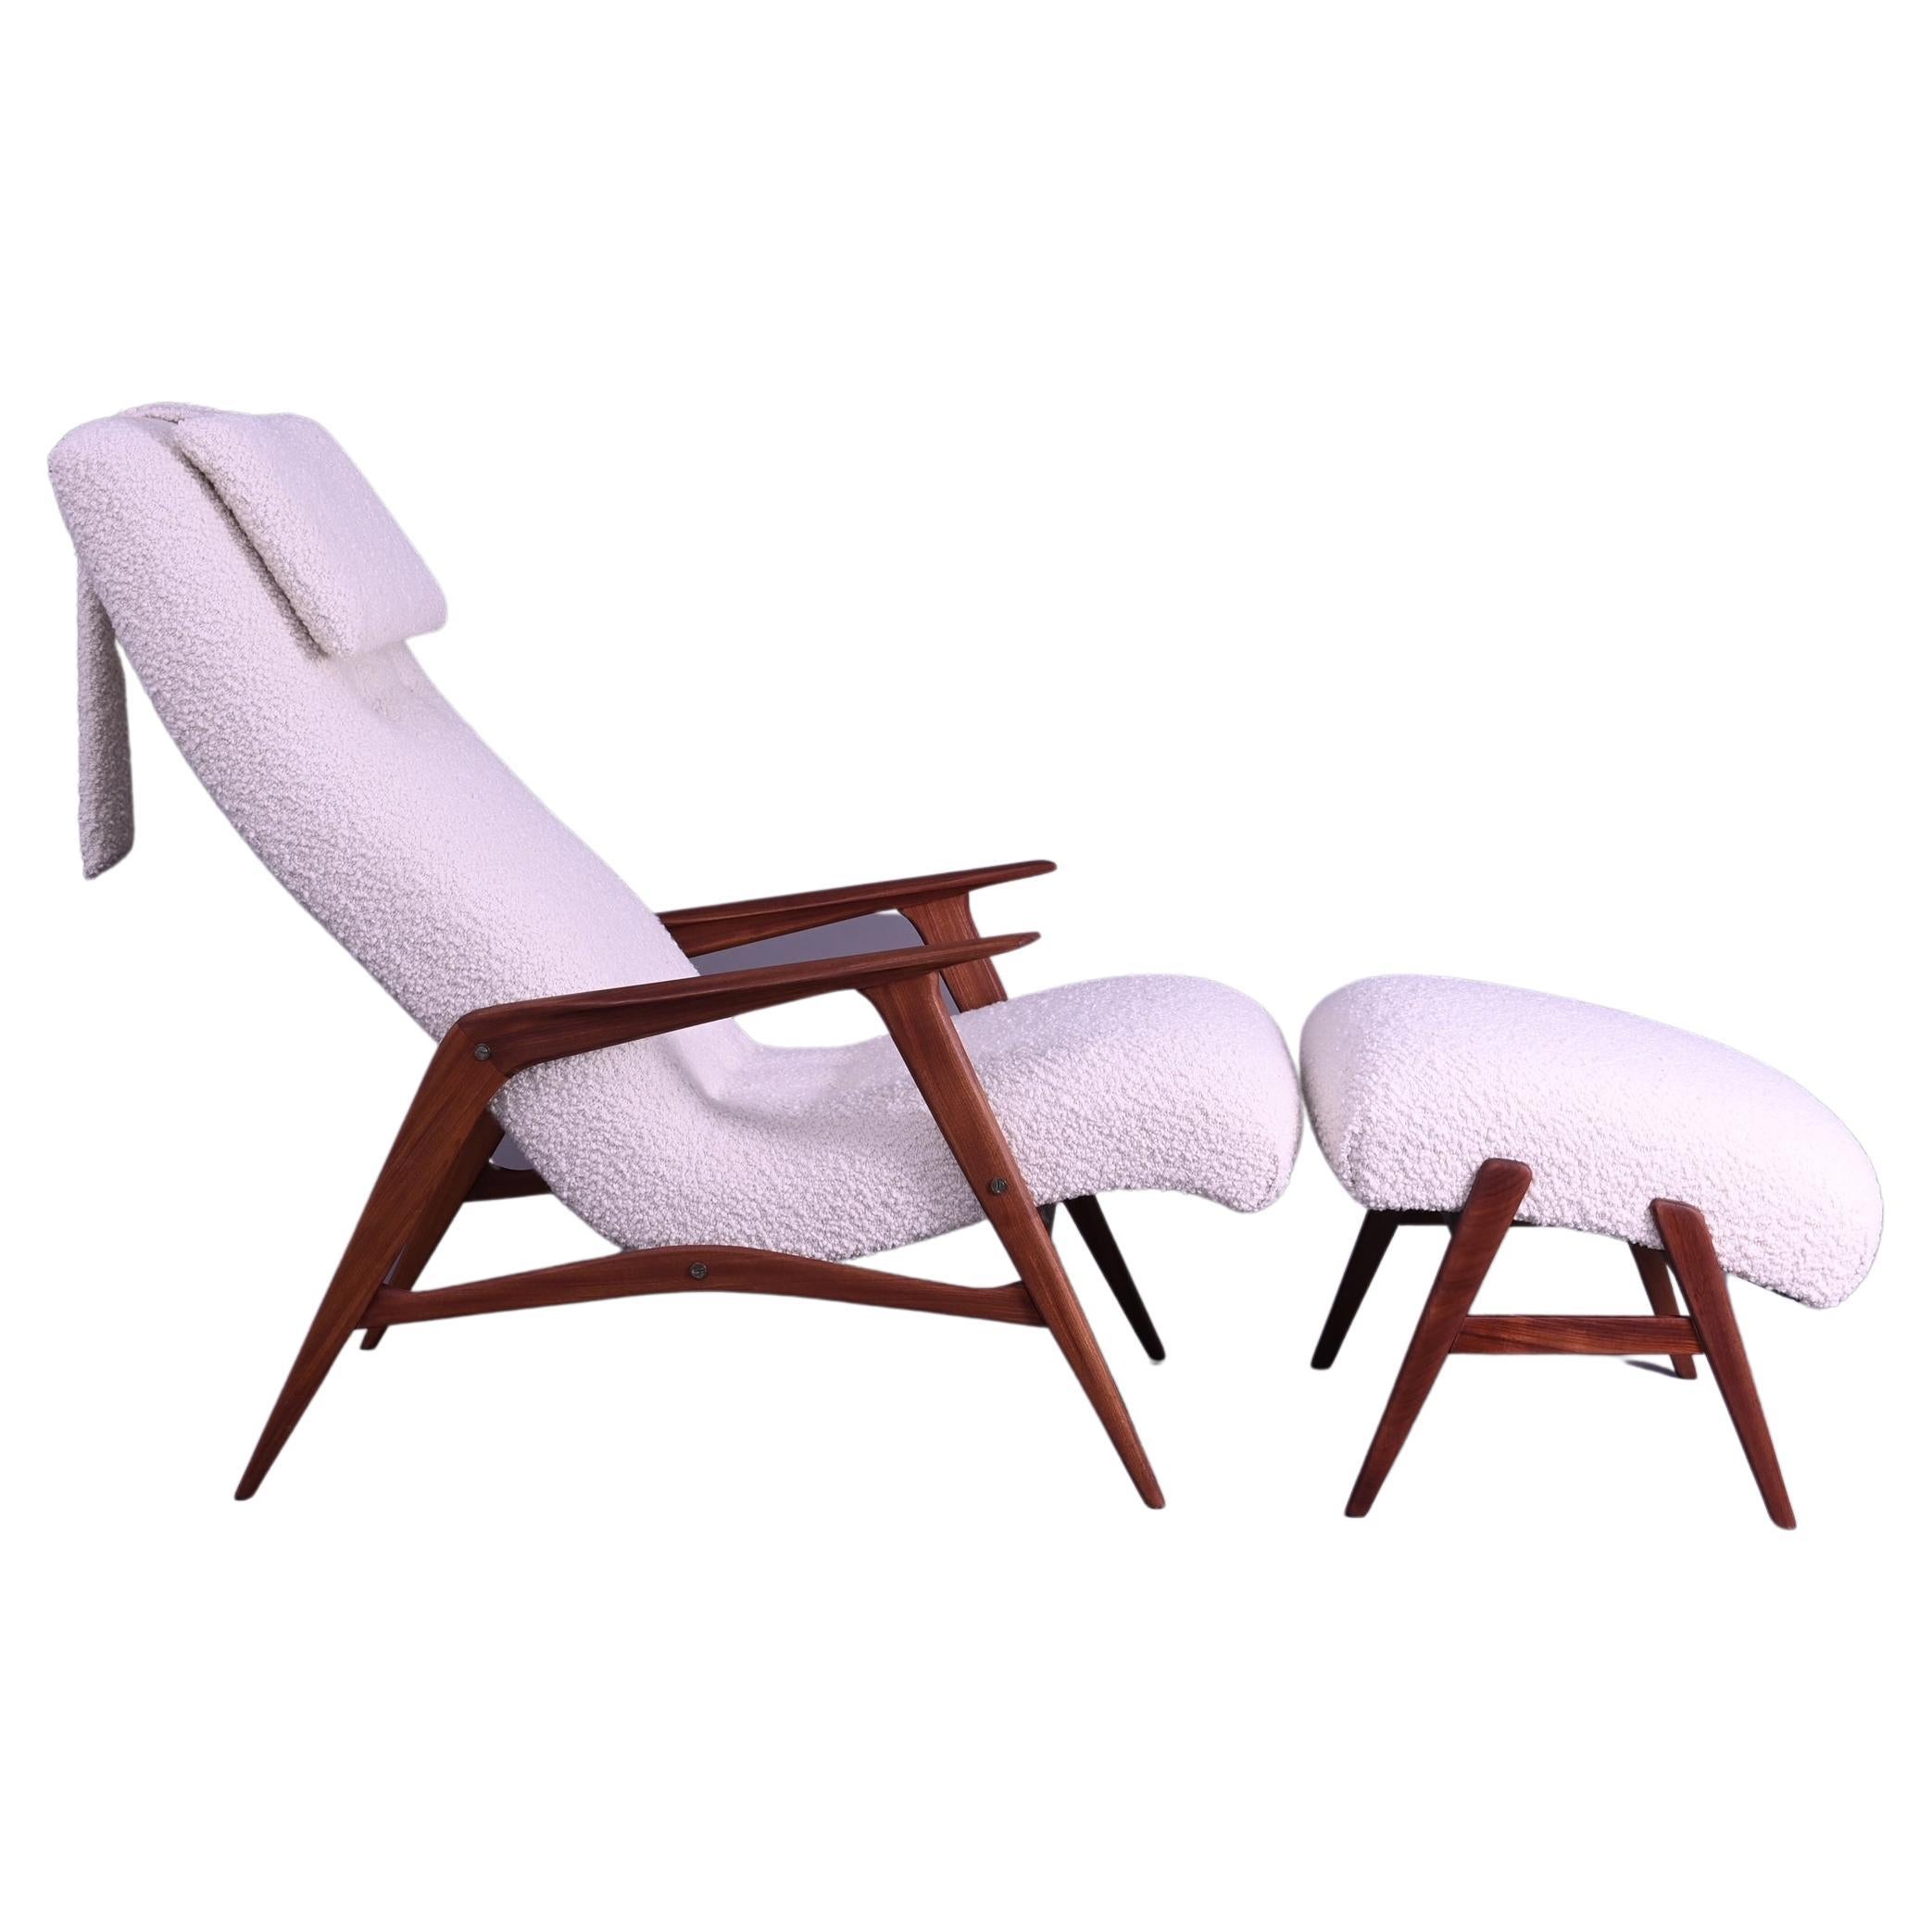 1960s 'Siesta' Chair and Ottoman by Jio Mobler